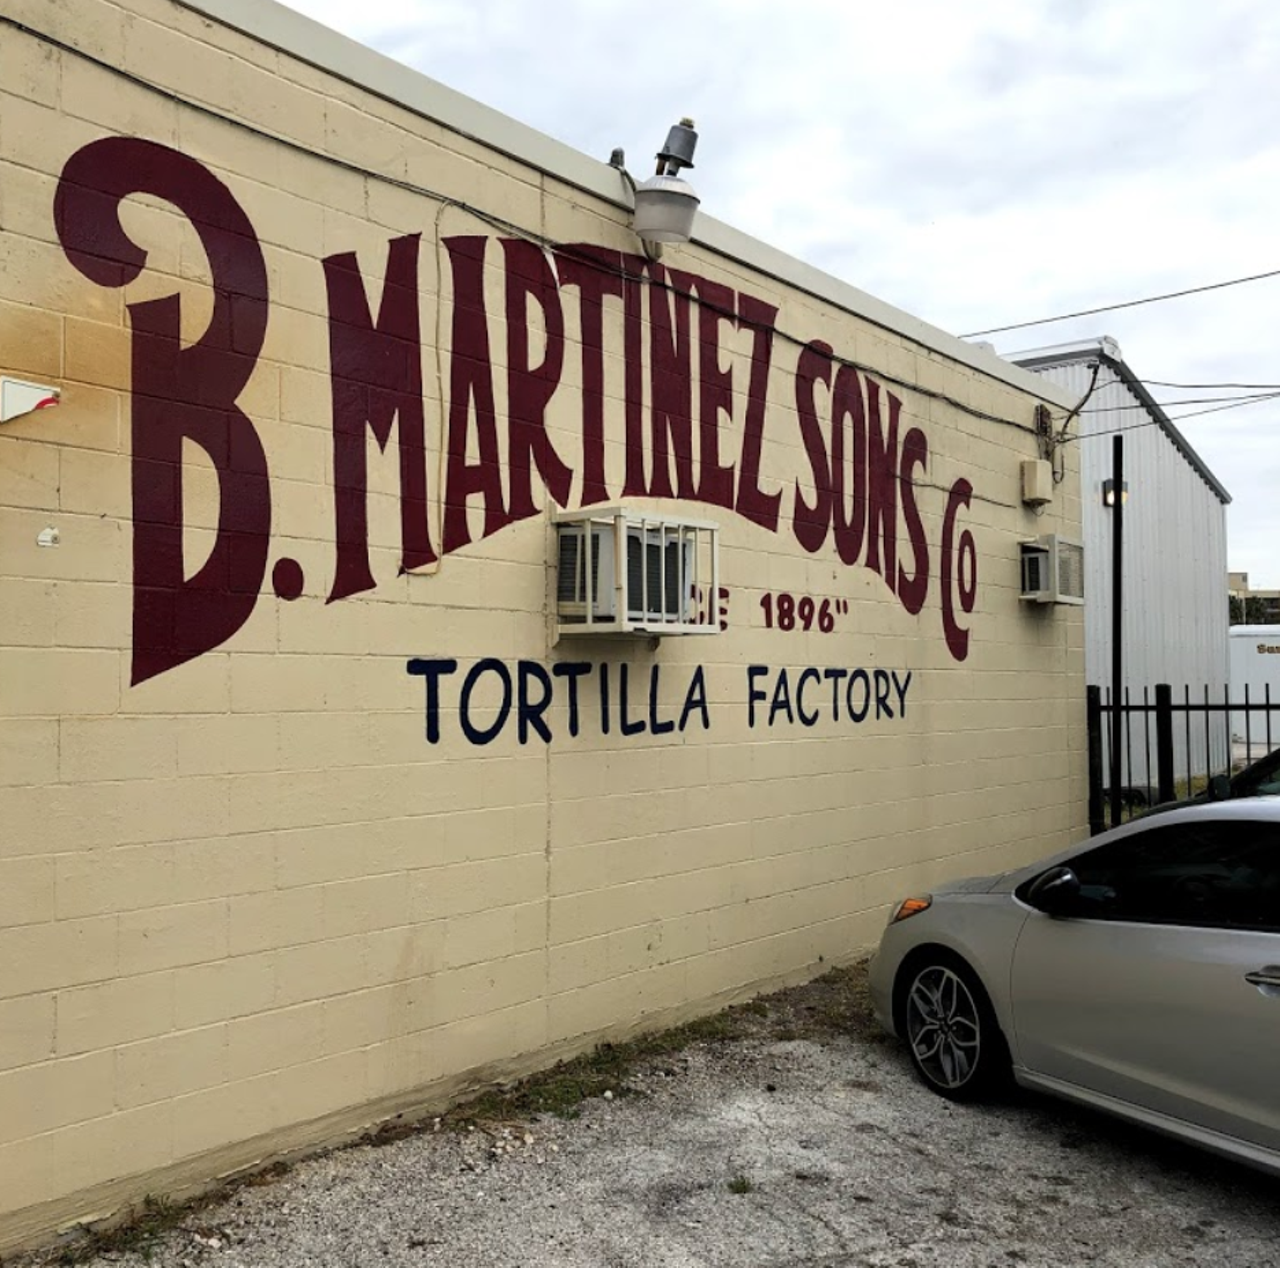 B. Martinez Sons Company
623 S Leona St, (210) 226-6772
Whether you want your tortillas already made or want the masa to make them just the way you like them, this family-owned outpost lets you do either – or both if you’re really feeling like tortillas.
Photo via Google Maps / Ignacio Martinez